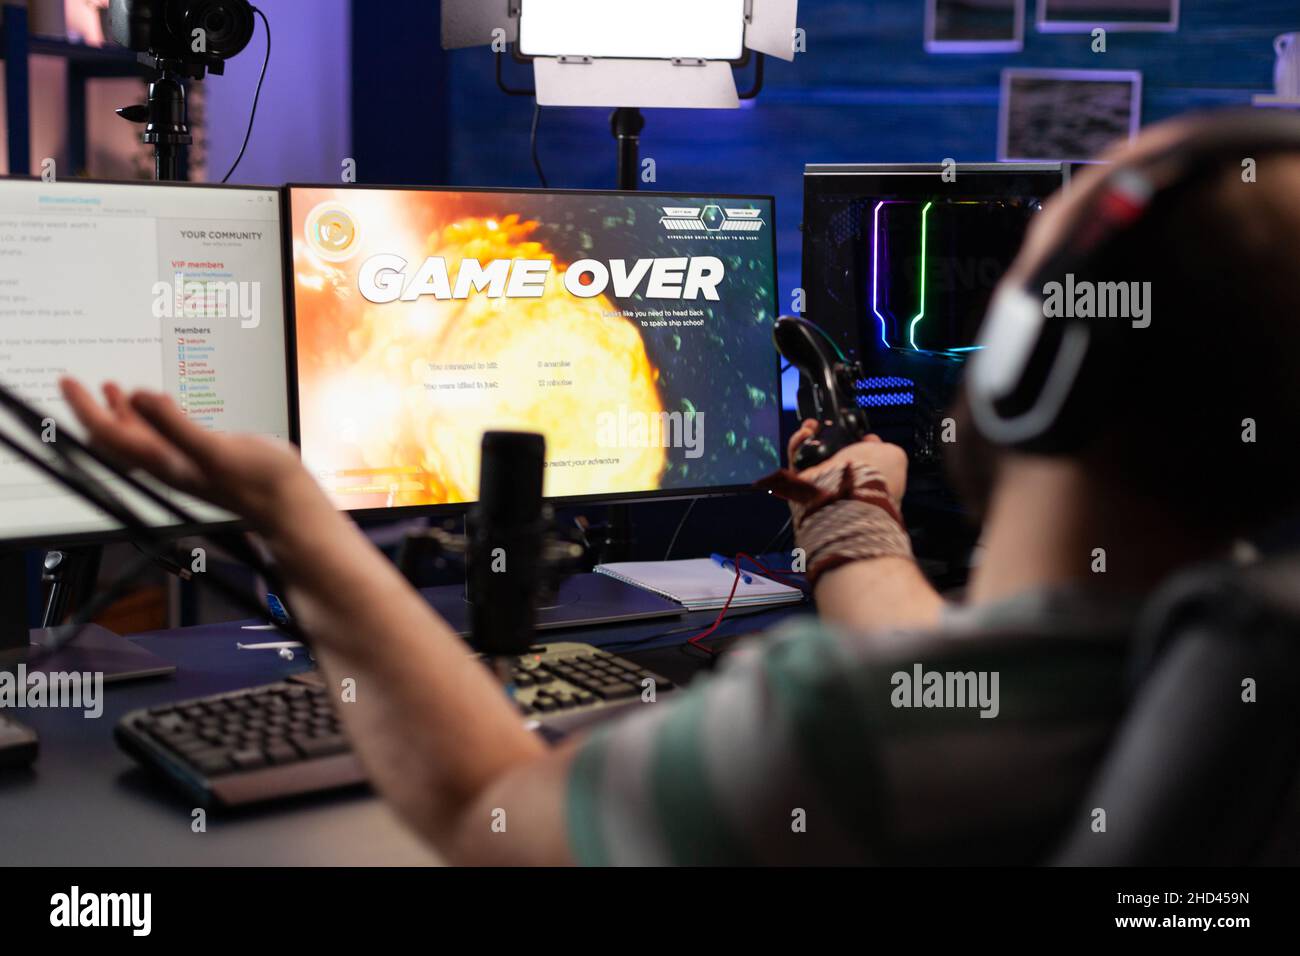 Player streaming video games with headset and losing on computer. Man looking at monitors with live stream chat and online game, playing and broadcasting gameplay with microphone. Stock Photo